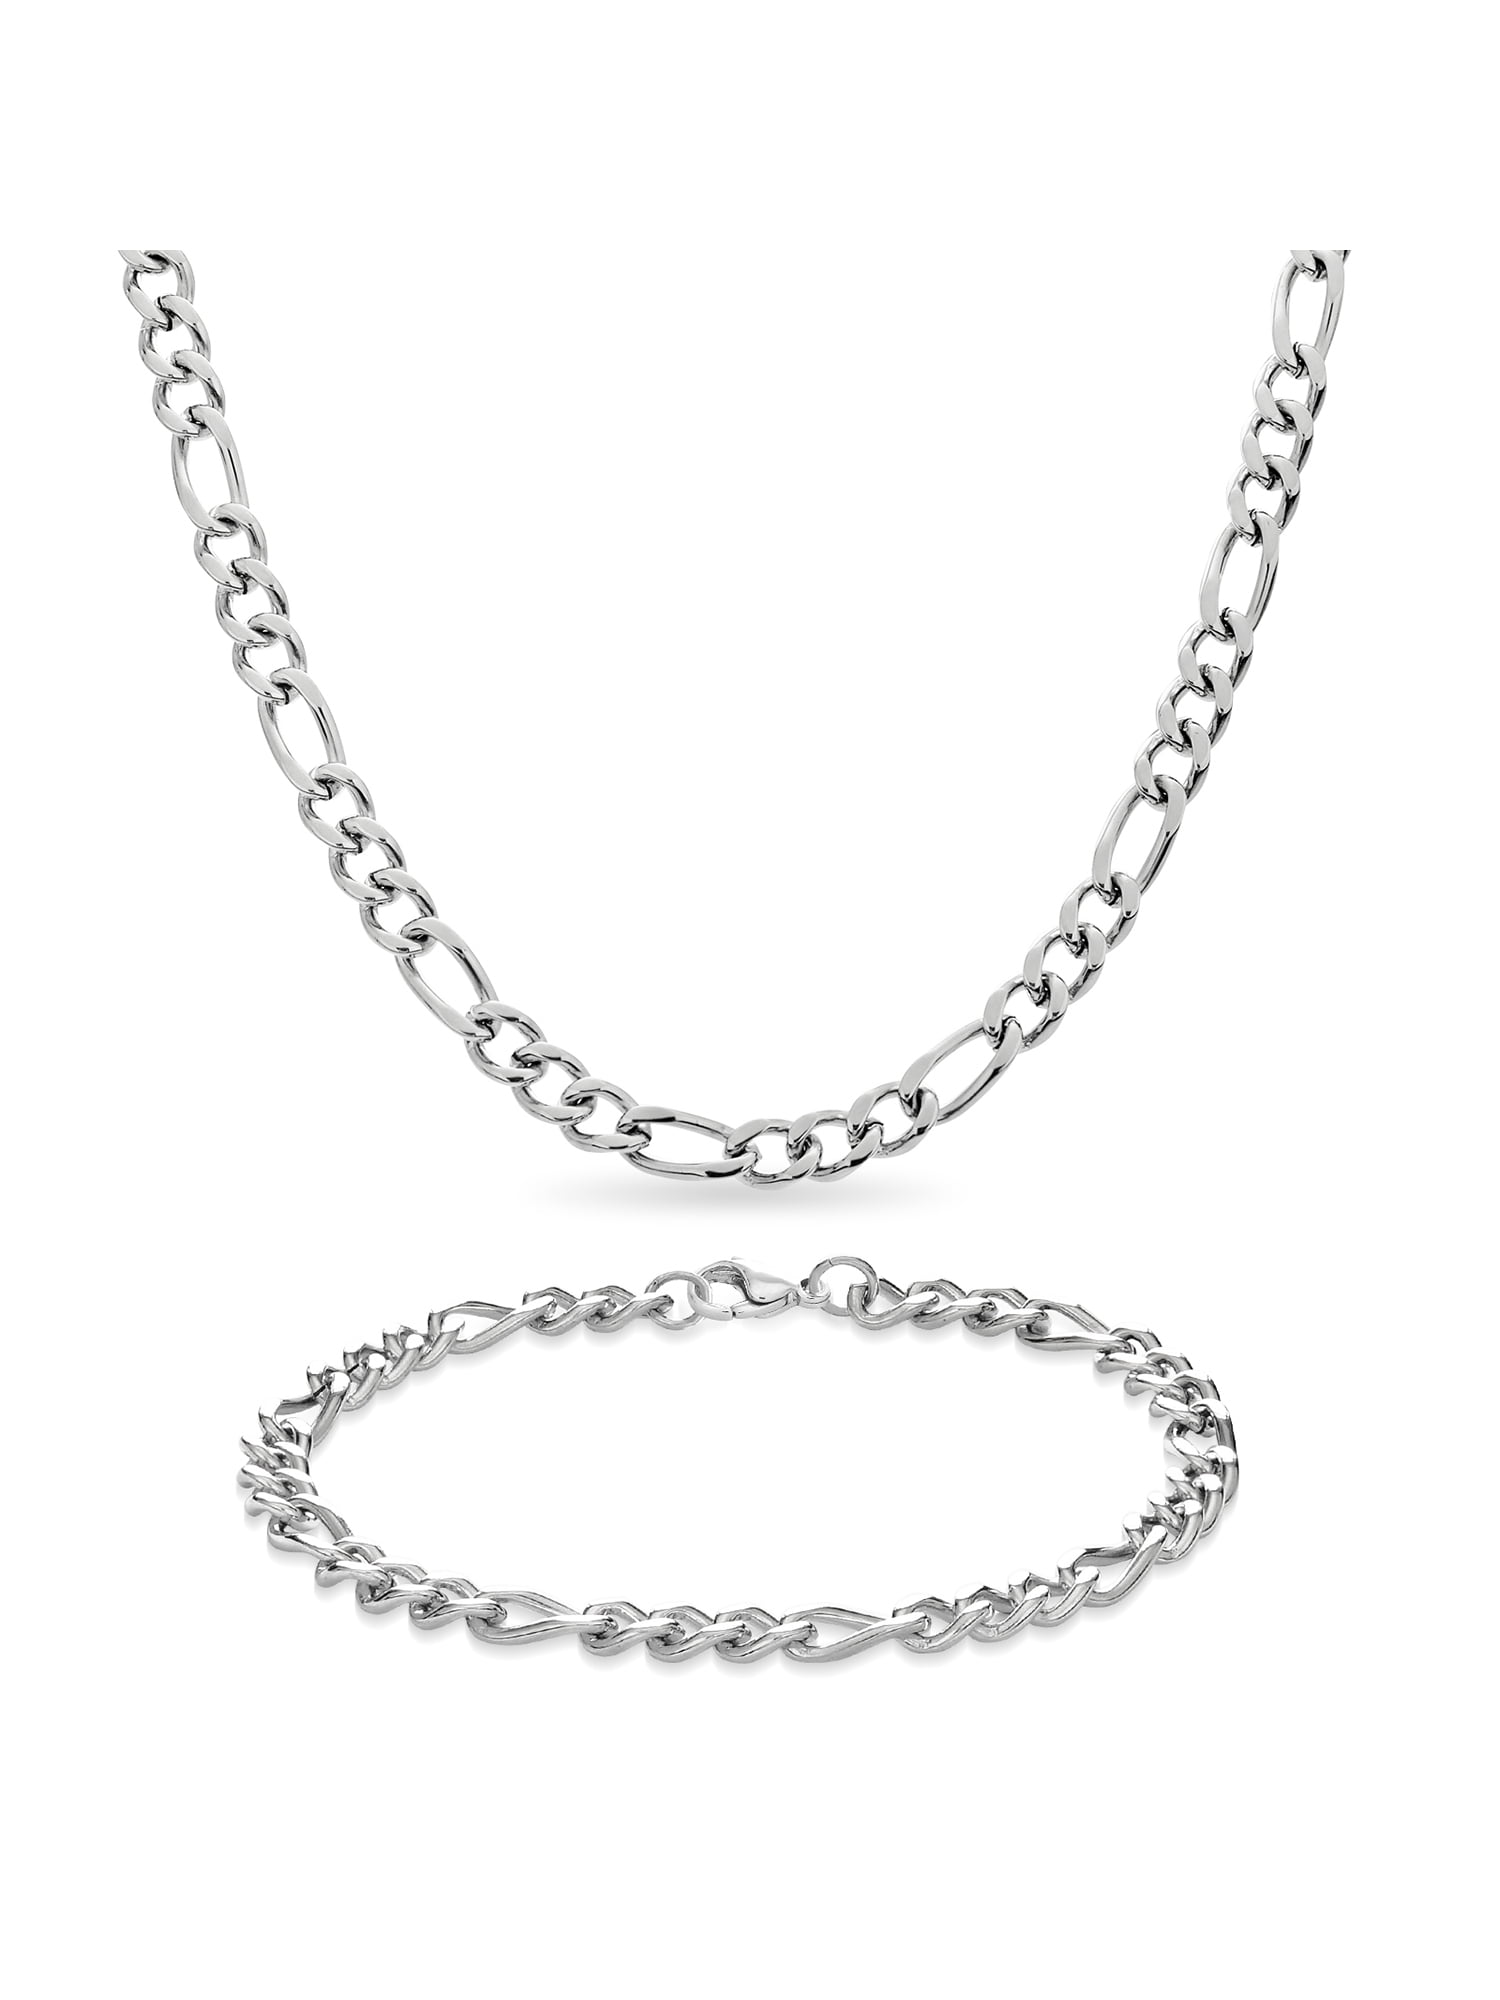 Gold Silver and Black Women magnetic stainless steel 316L links necklace 